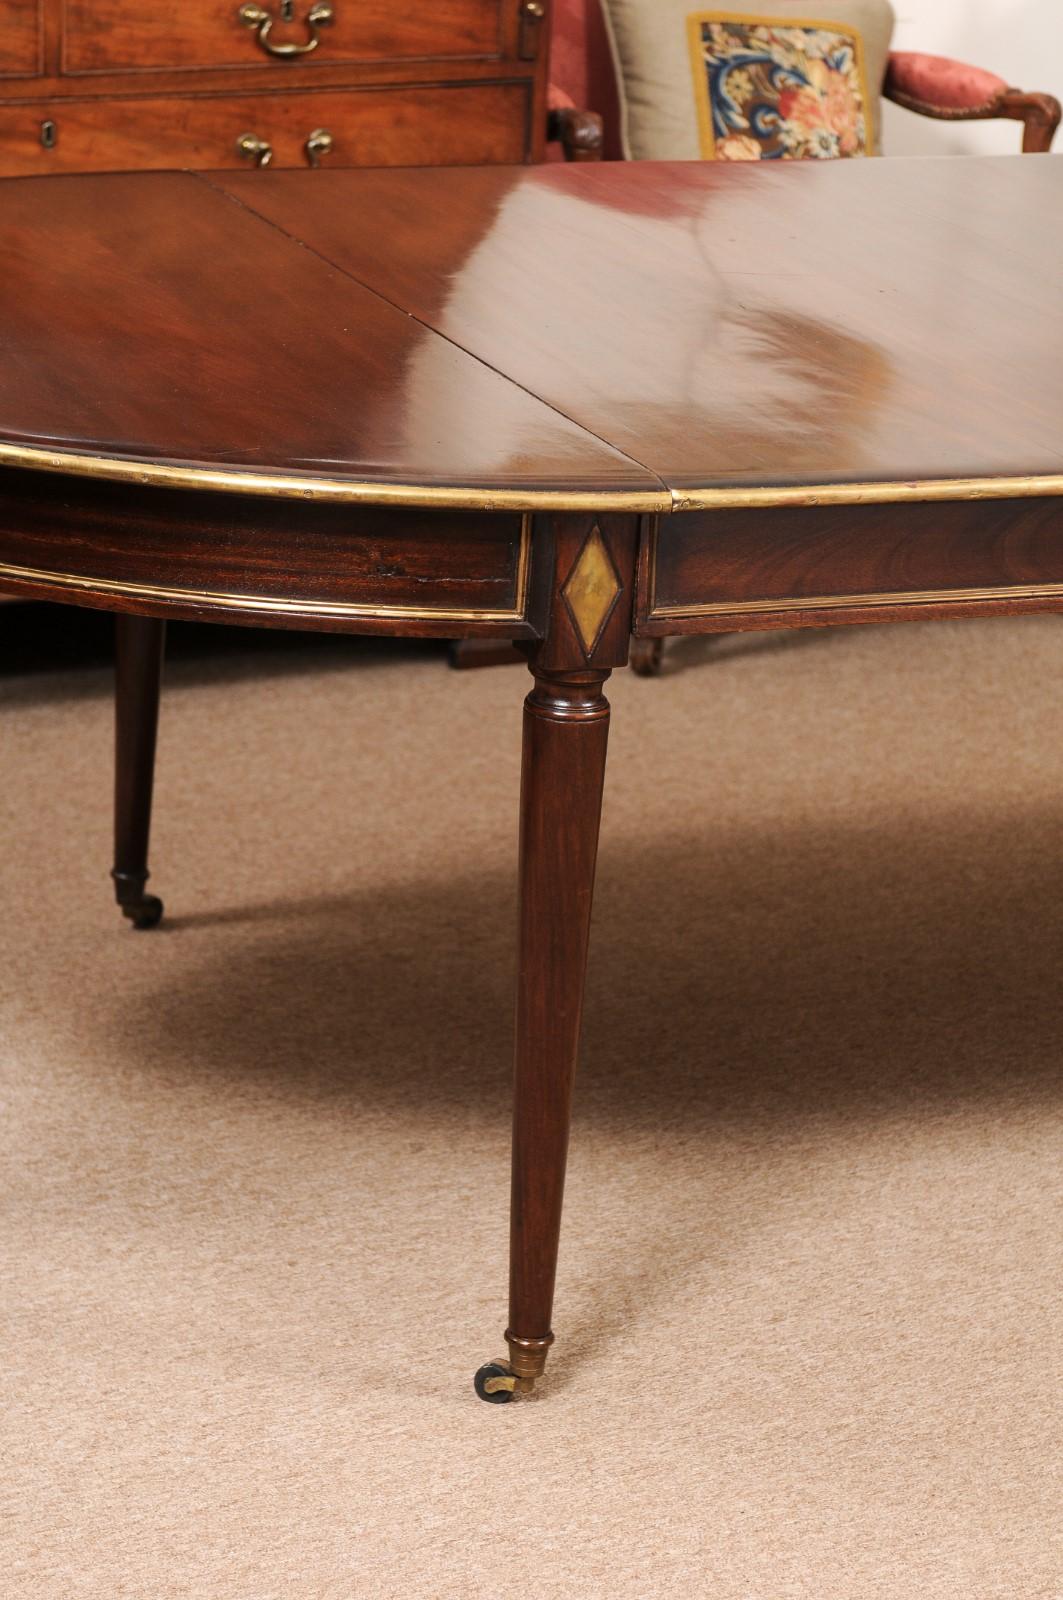 19th Century French directoire style mahogany dining table with brass details.